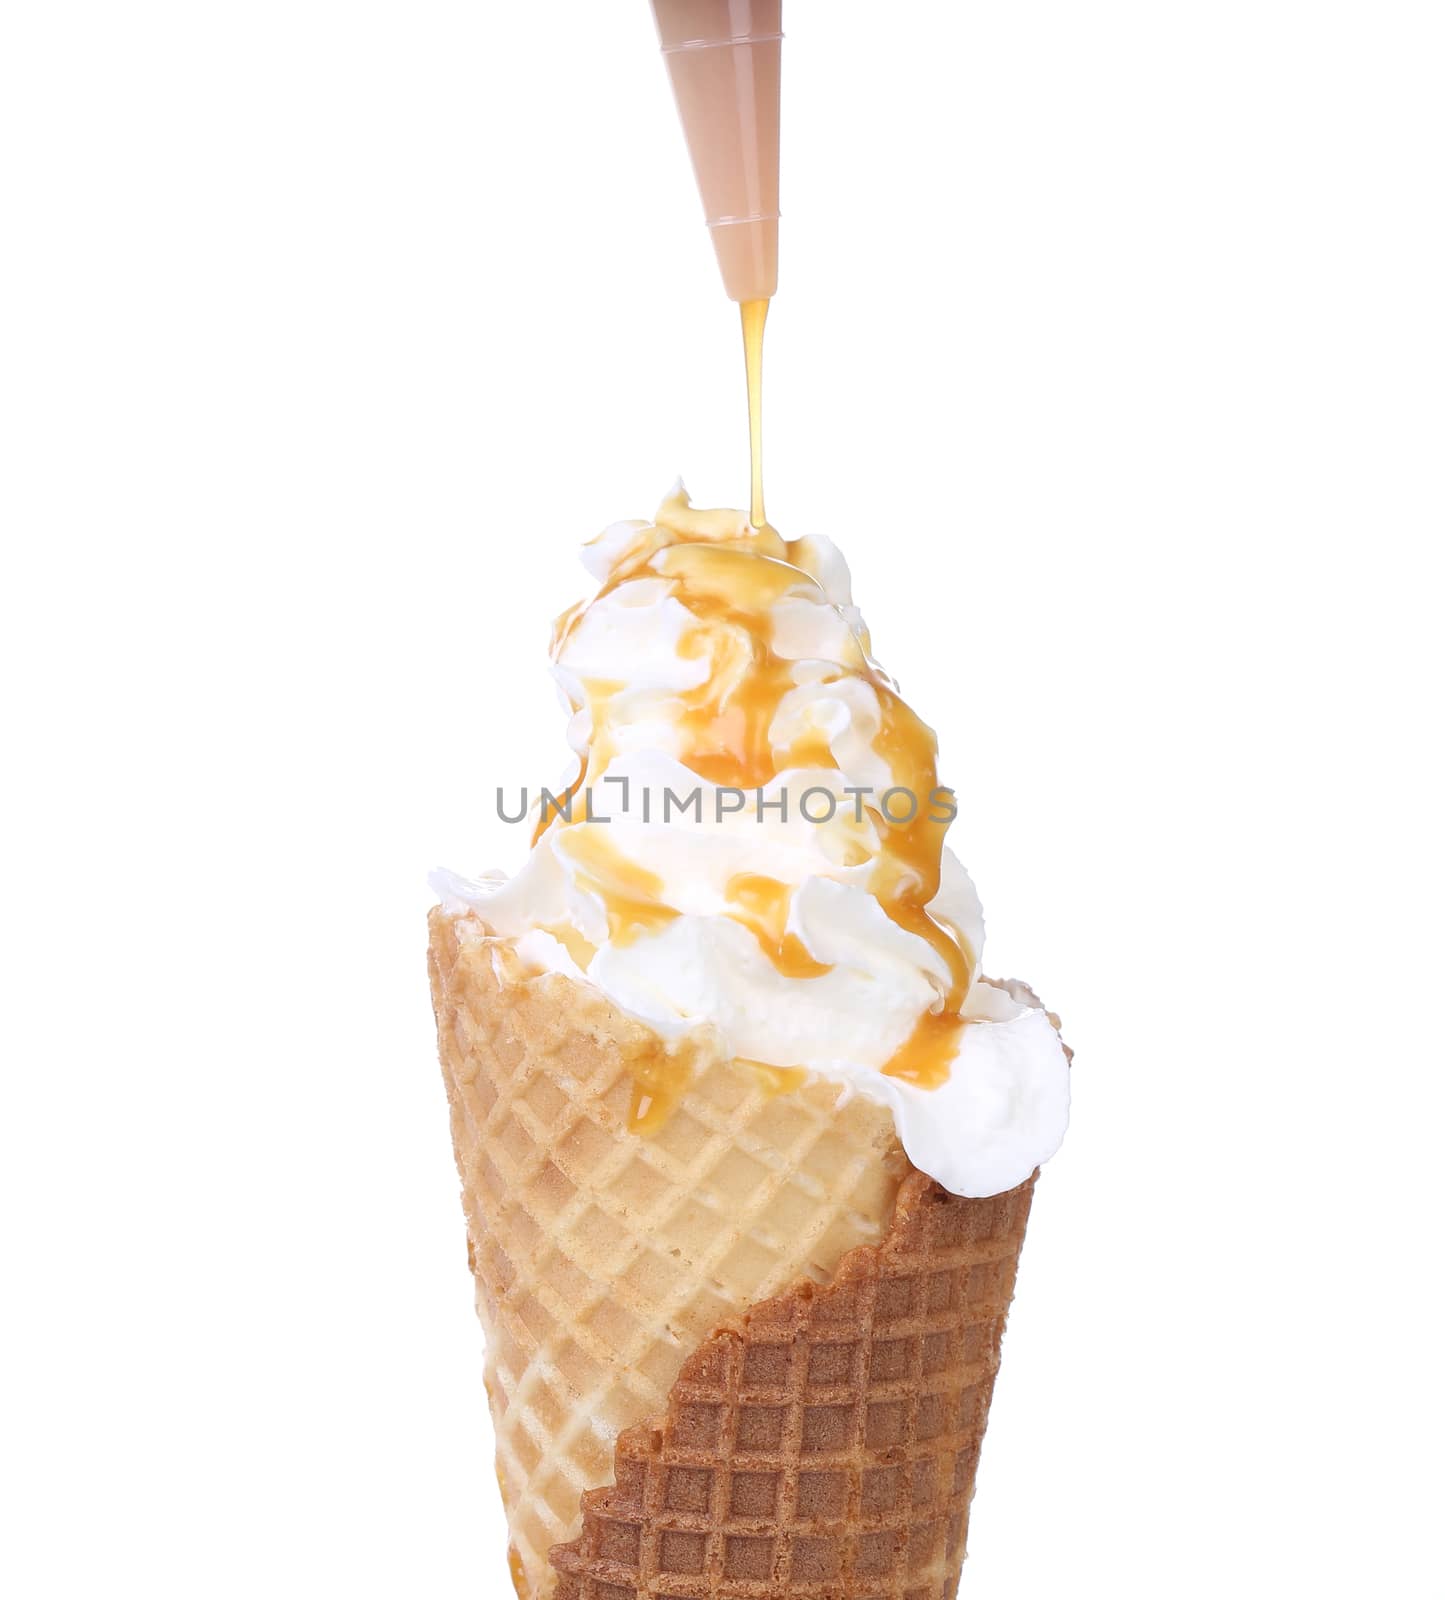 White ice creame in cone. Isolated on a white background.